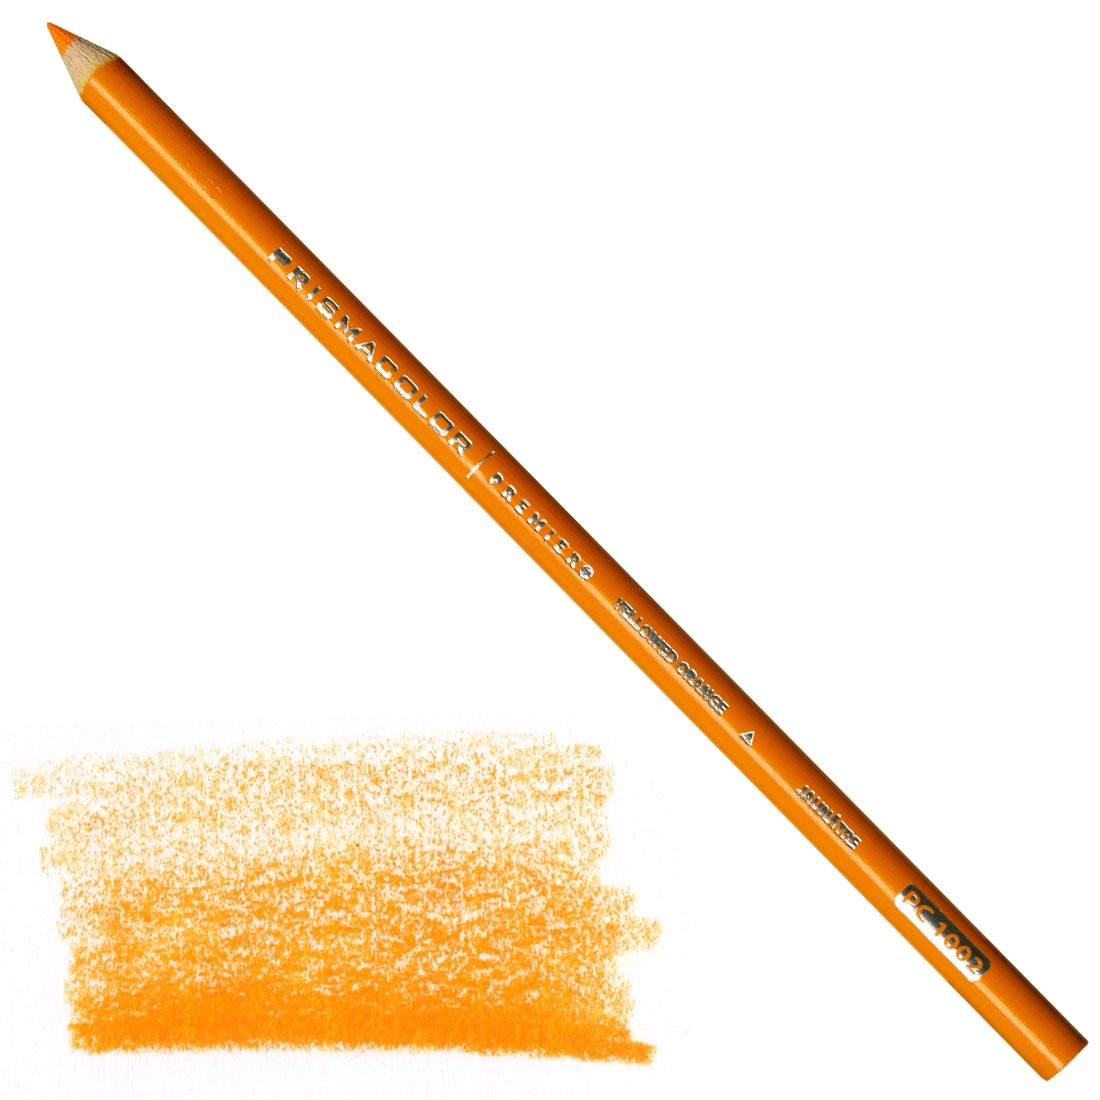 Yellowed Orange Prismacolor Premier Colored Pencil with a sample colored swatch